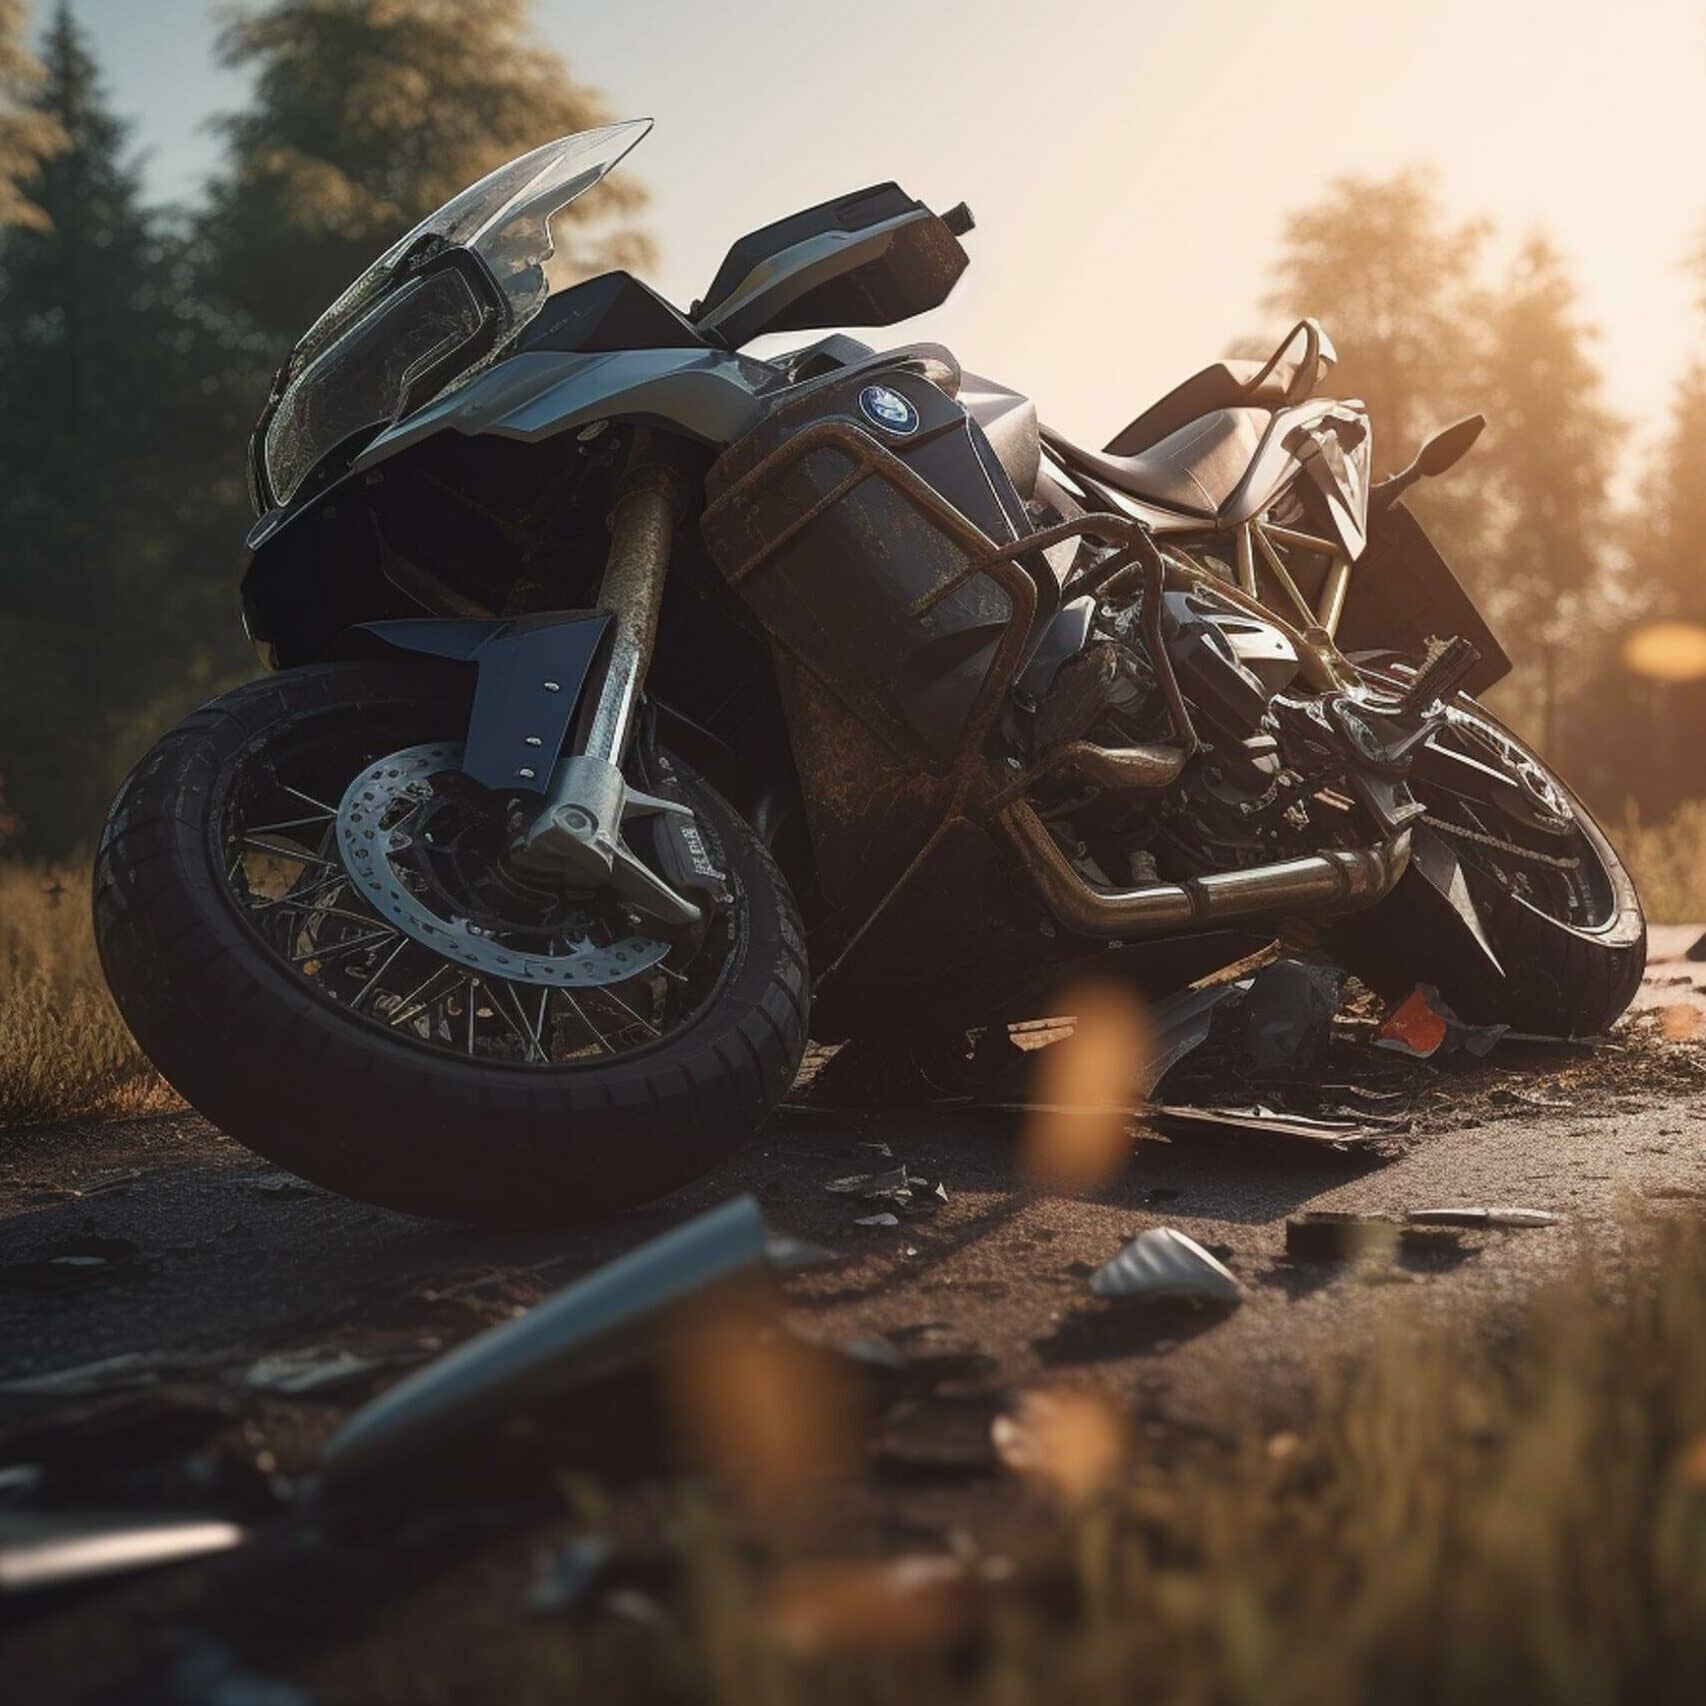 Accident between car and motorcycle causes harm and prompts inquiry. Boerne Motorcycle Accident Lawyers. McAllen Motorcycle Accidents